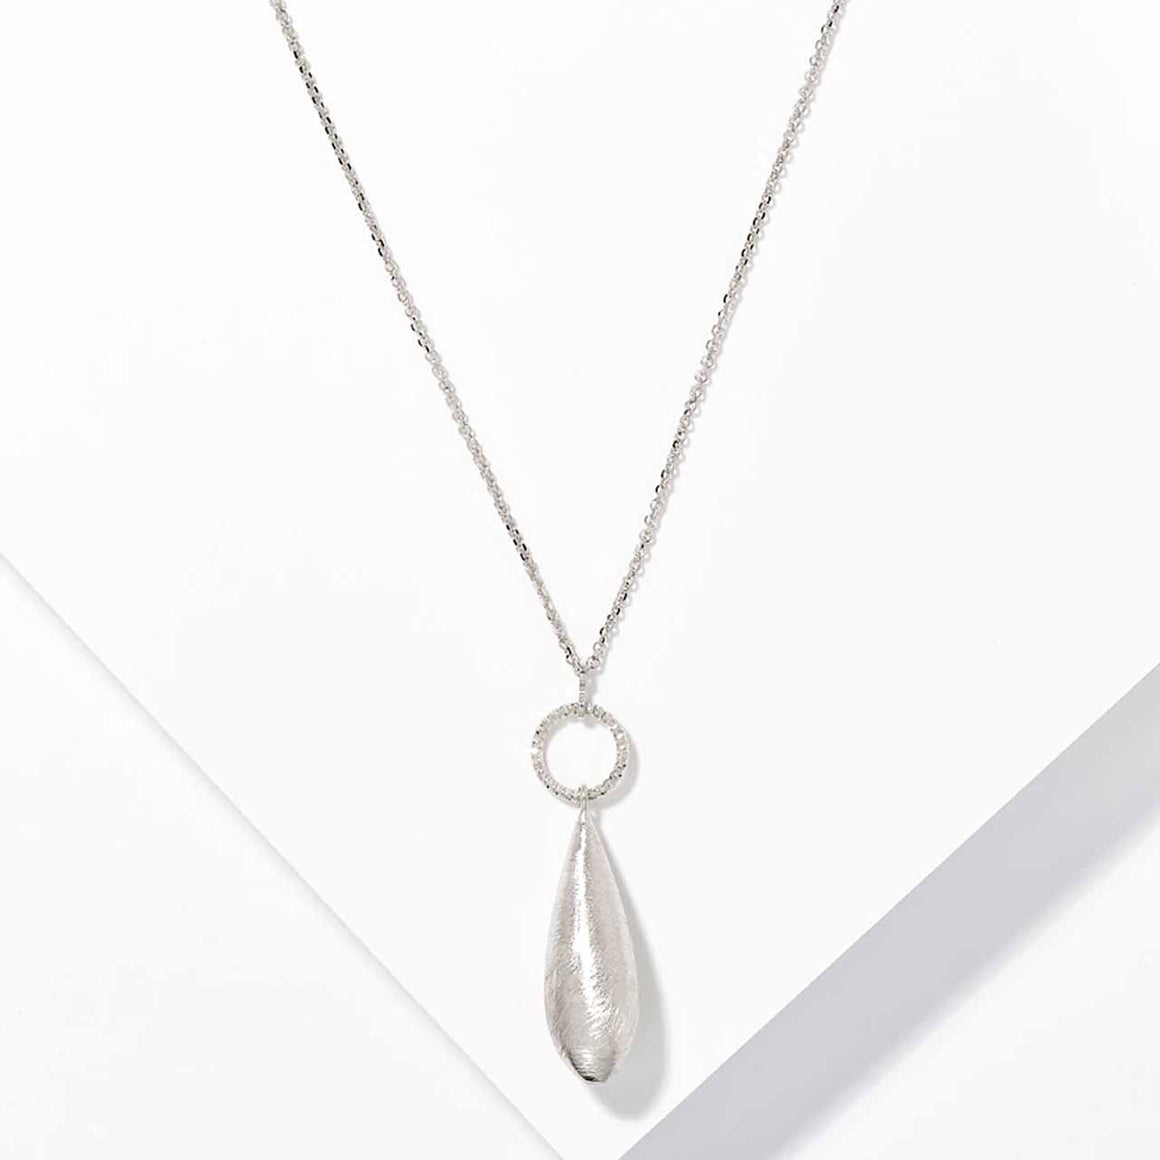 Sterling Silver Teardrop Pendant and Chain Necklace